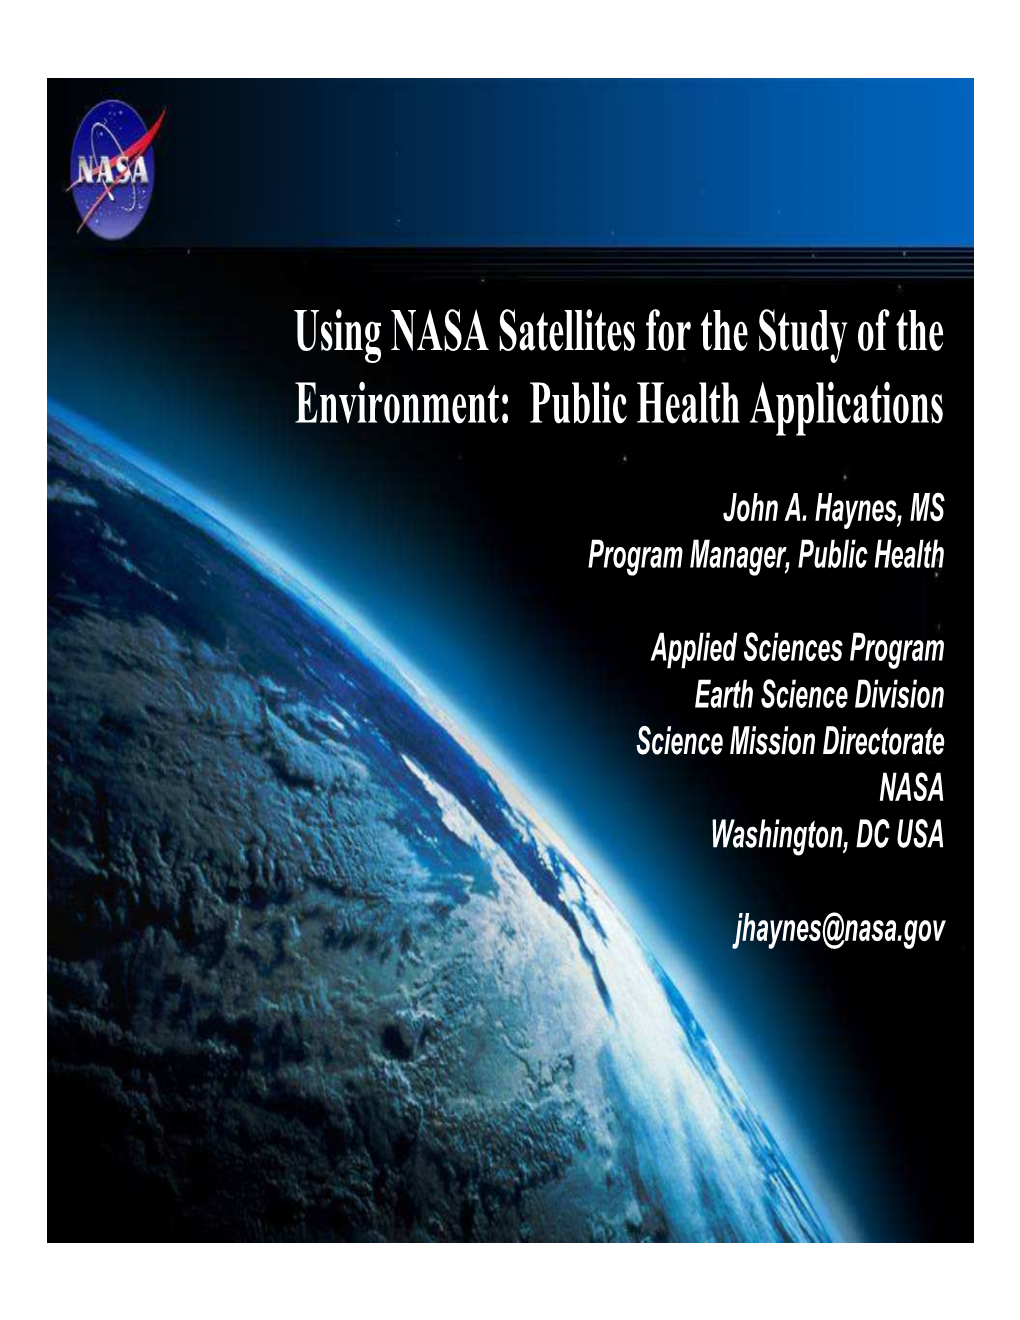 Using NASA Satellites for the Study of the Environment: Public Health Applications